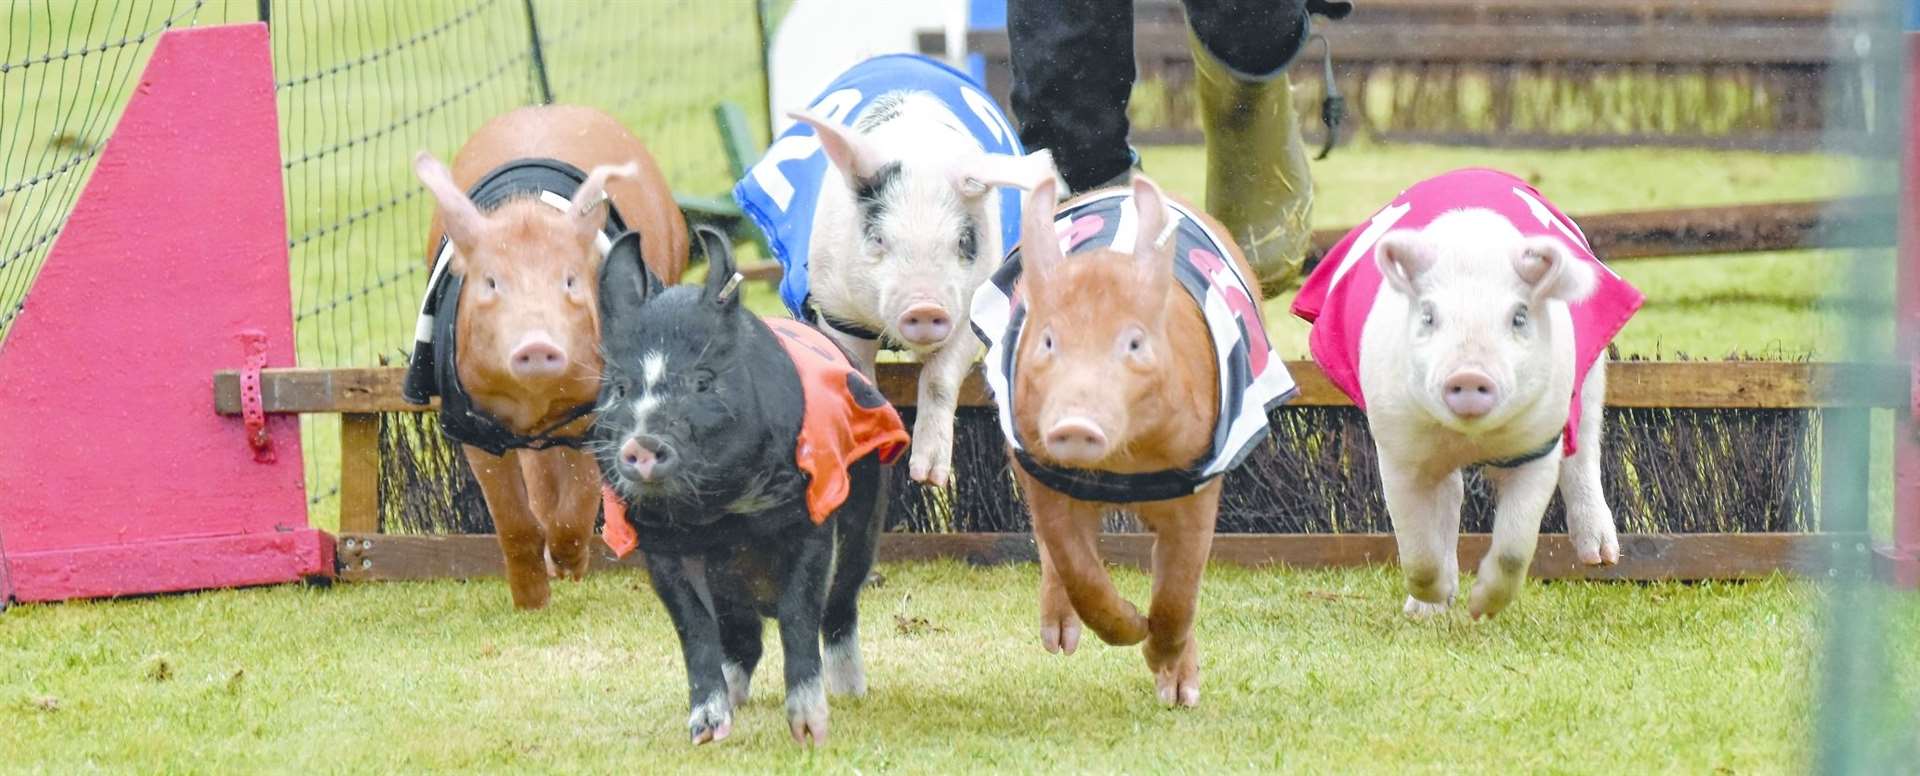 Gordon Castle Highland Games and Country Fair in Fochabers takes place on May 19. Picture: Lyn MacDonald / SPP